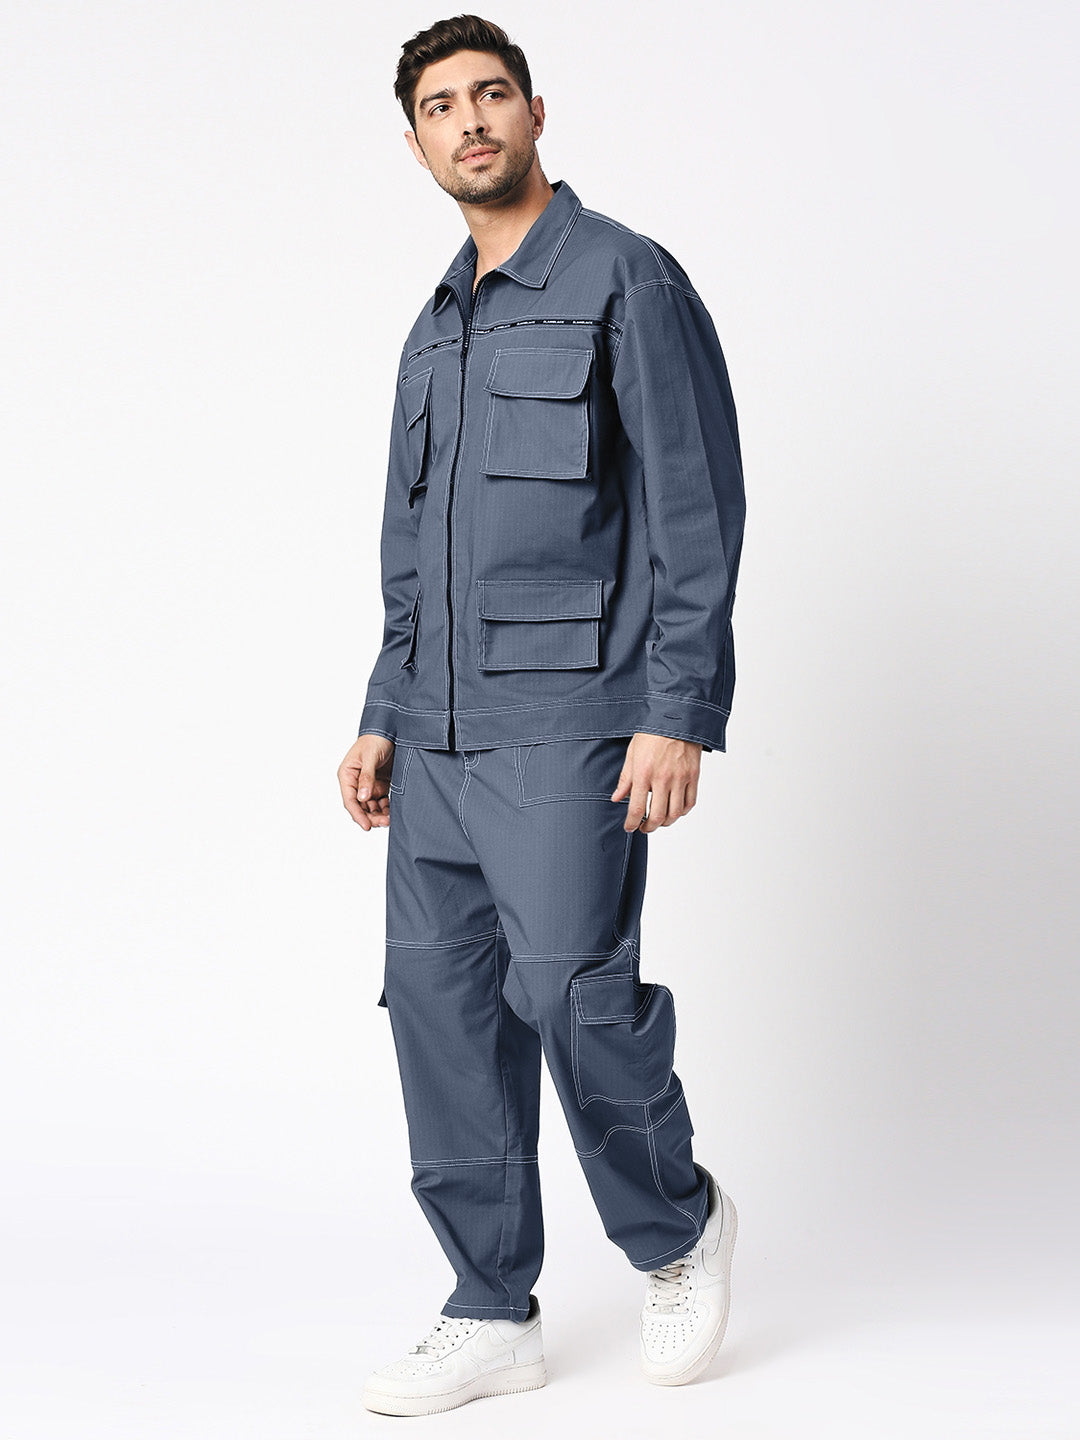 BLAMBLACK Men's Cargo Style Jacket With Pant Navy Blue Color Co-Ord Set